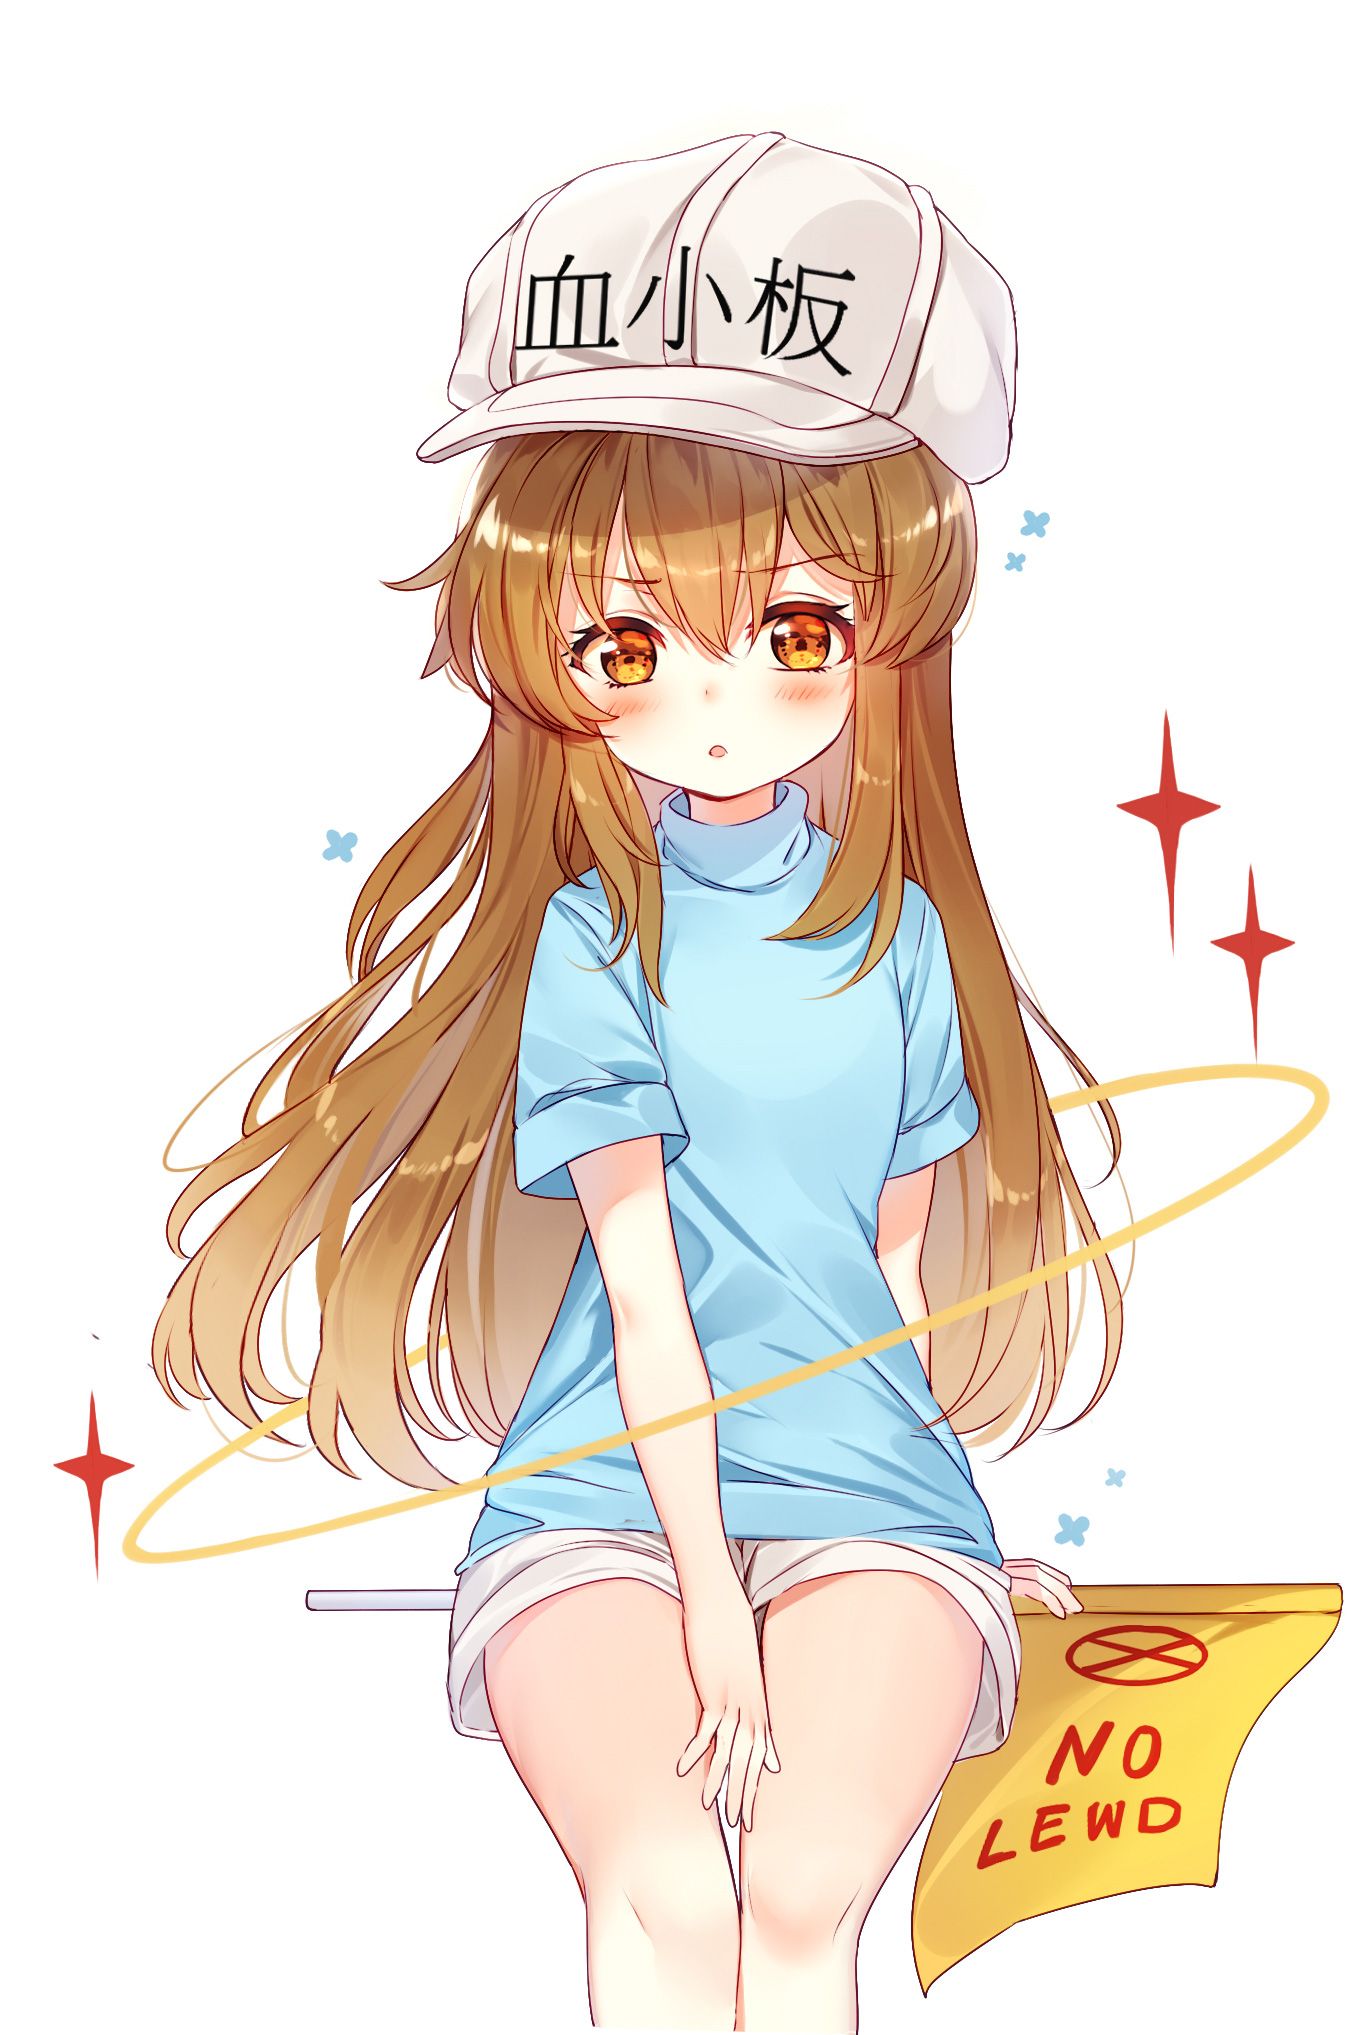 [Working cells] secondary images of platelets 1 60 sheets [ero/non-erotic] 41